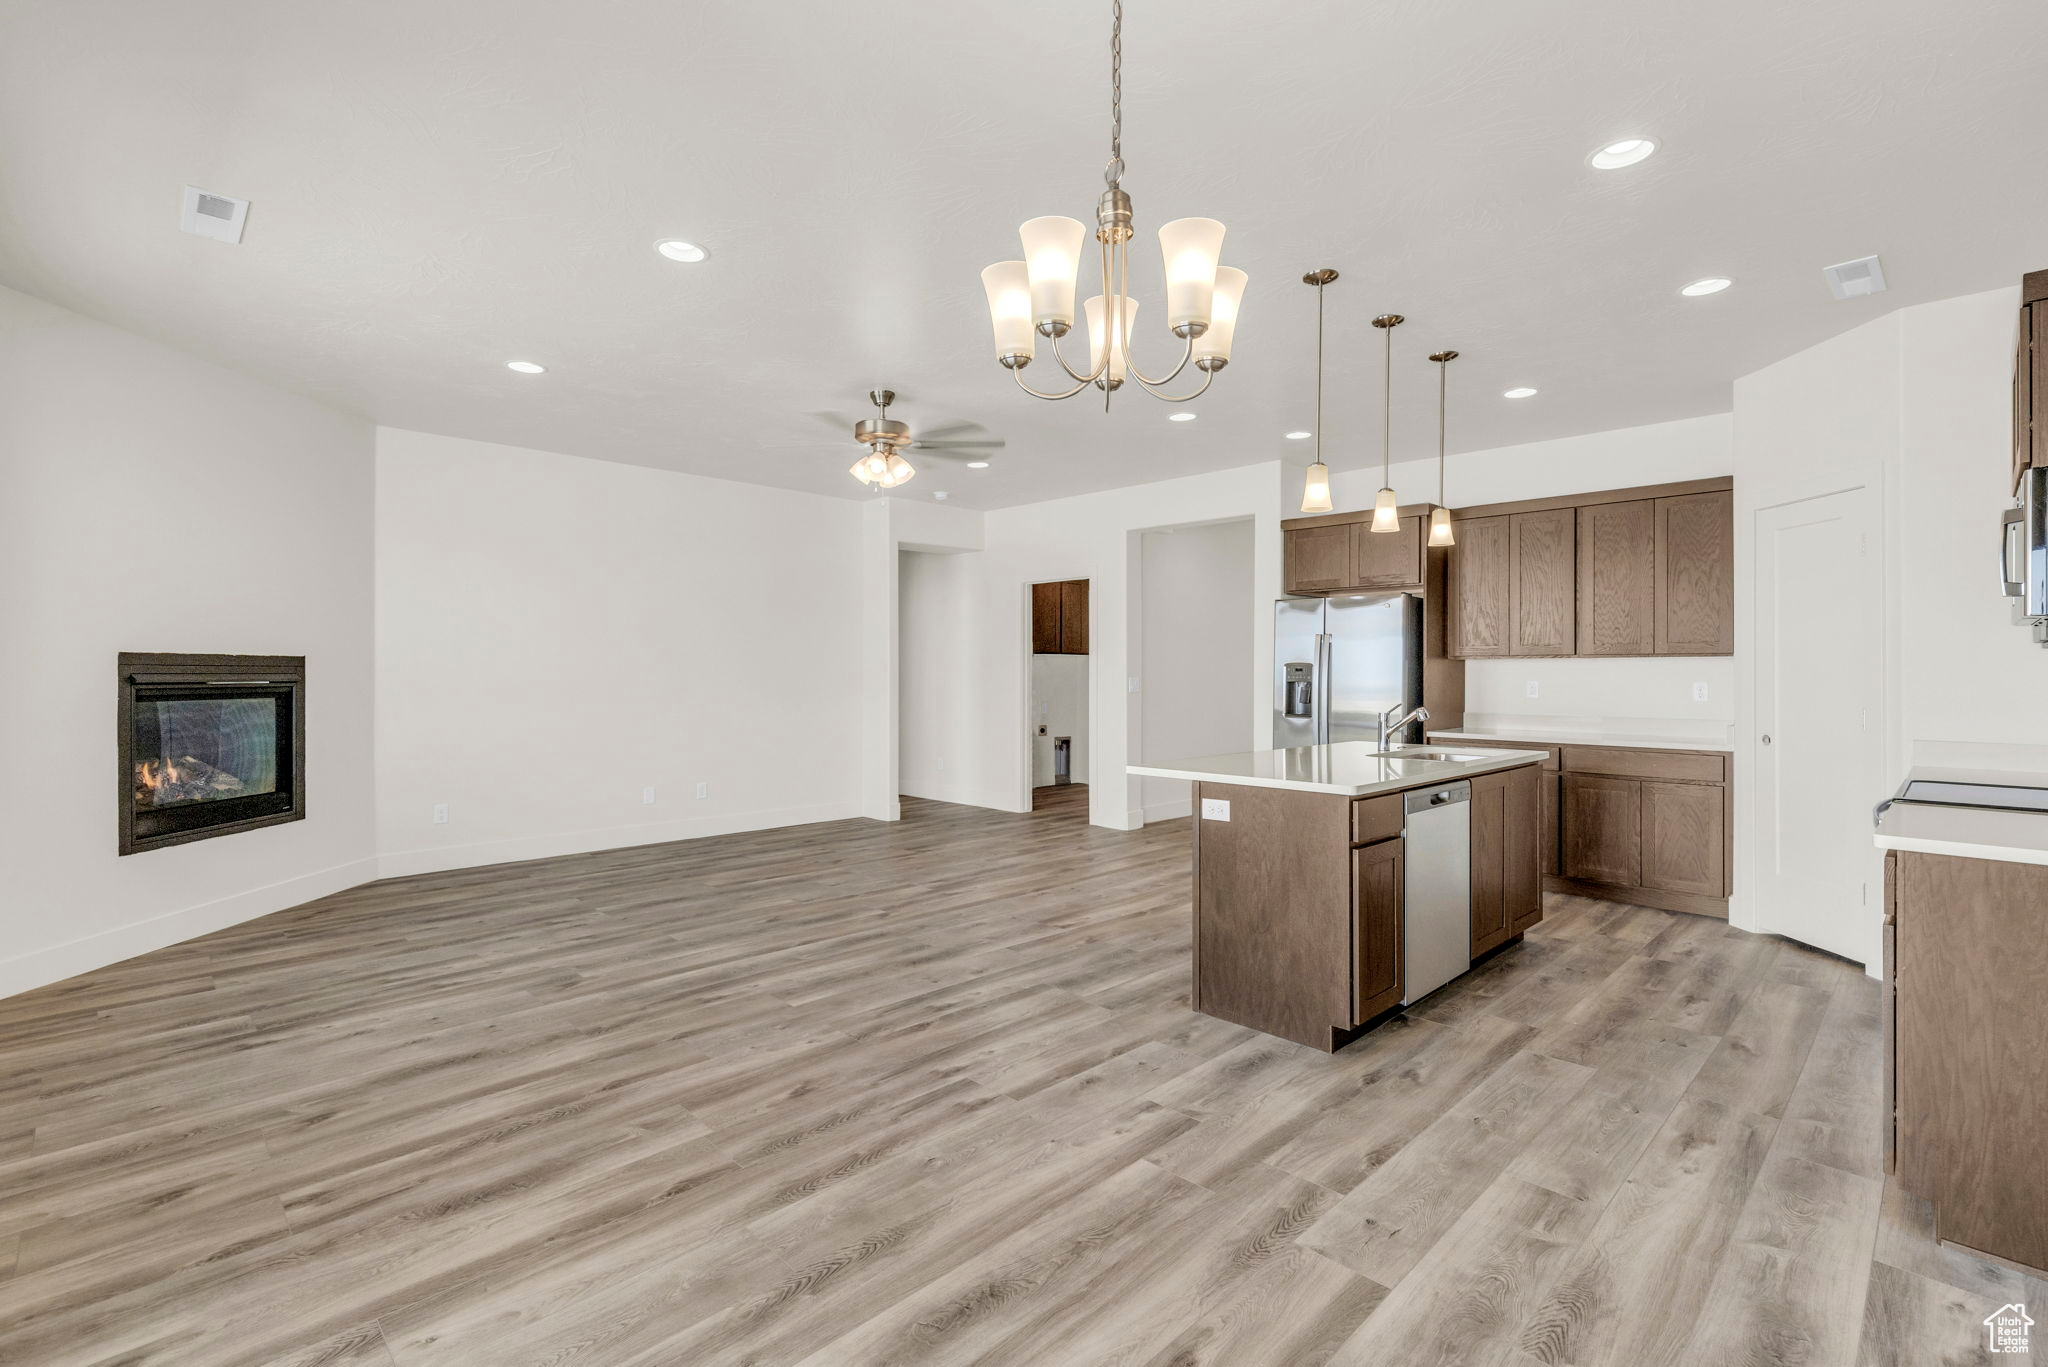 Kitchen featuring pendant lighting, ceiling fan with notable chandelier, stainless steel appliances, light hardwood / wood-style floors, and a kitchen island with sink